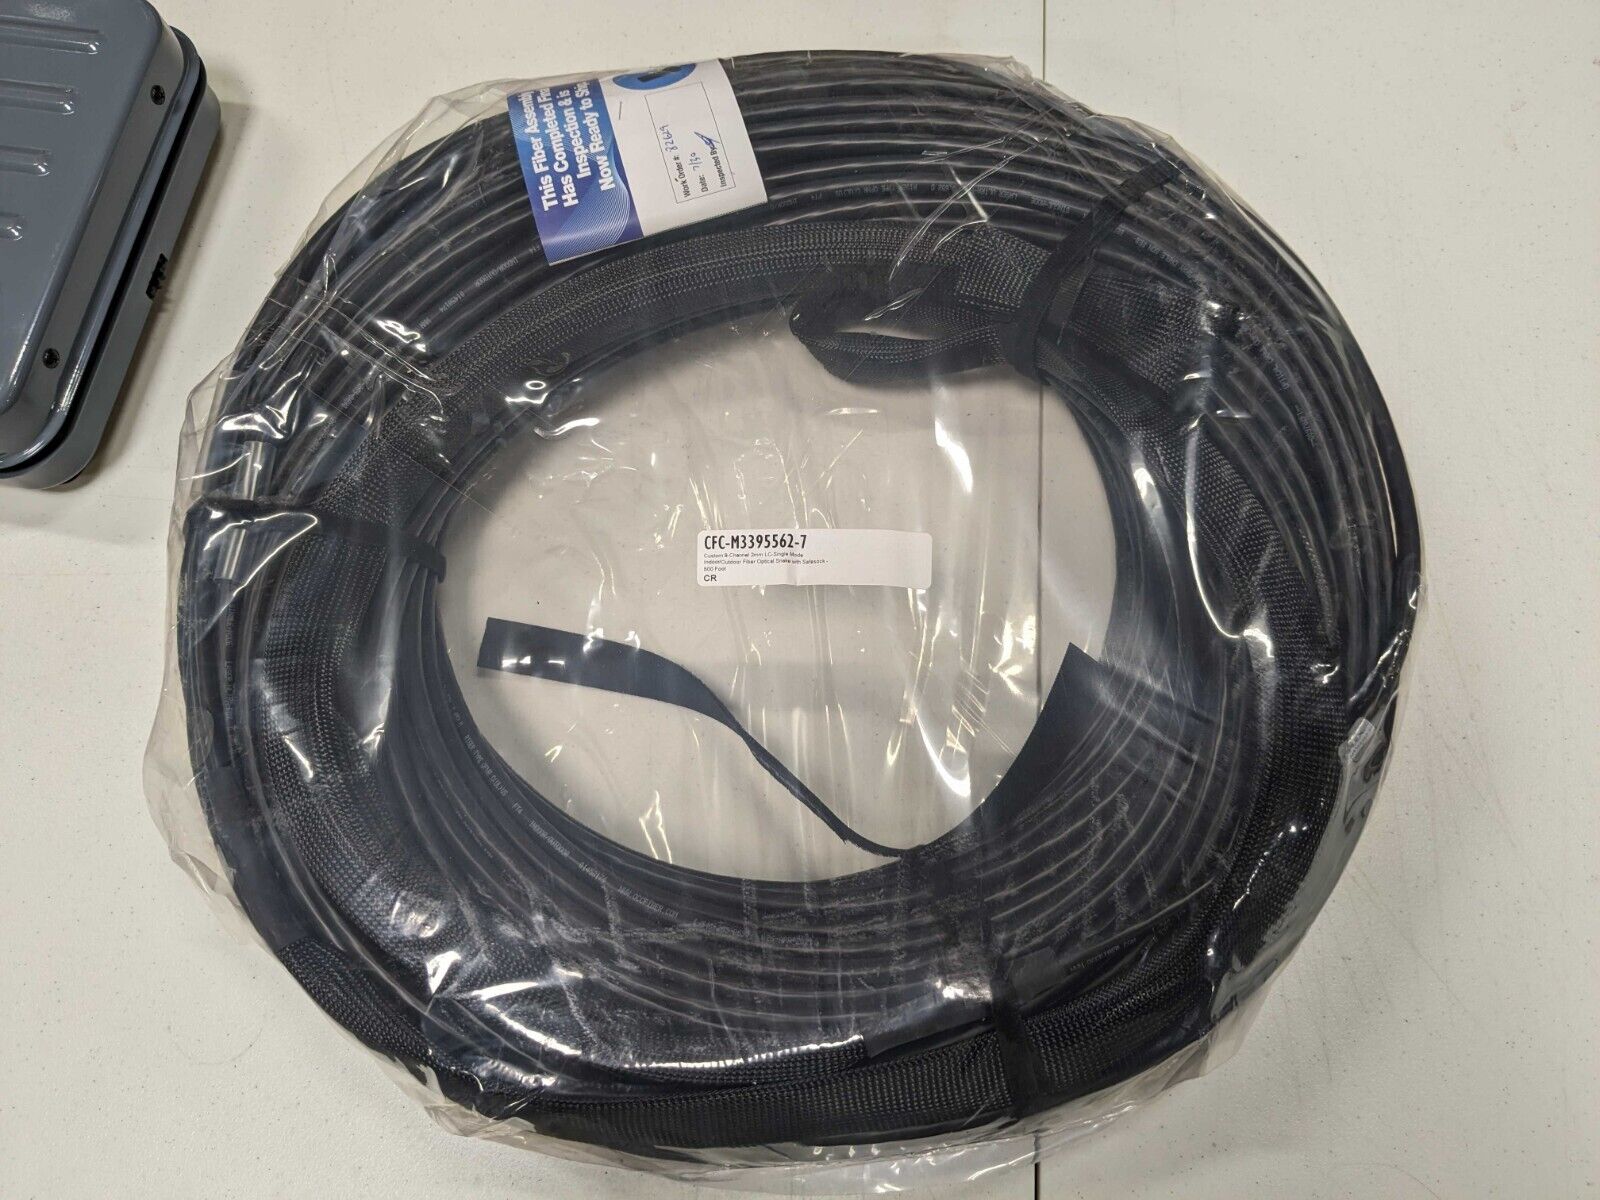 500FT, CUSTOM-MADE, 8 CHANNEL FIBER OPTIC NETWORK CABLE, MILITARY GRADE, NEW